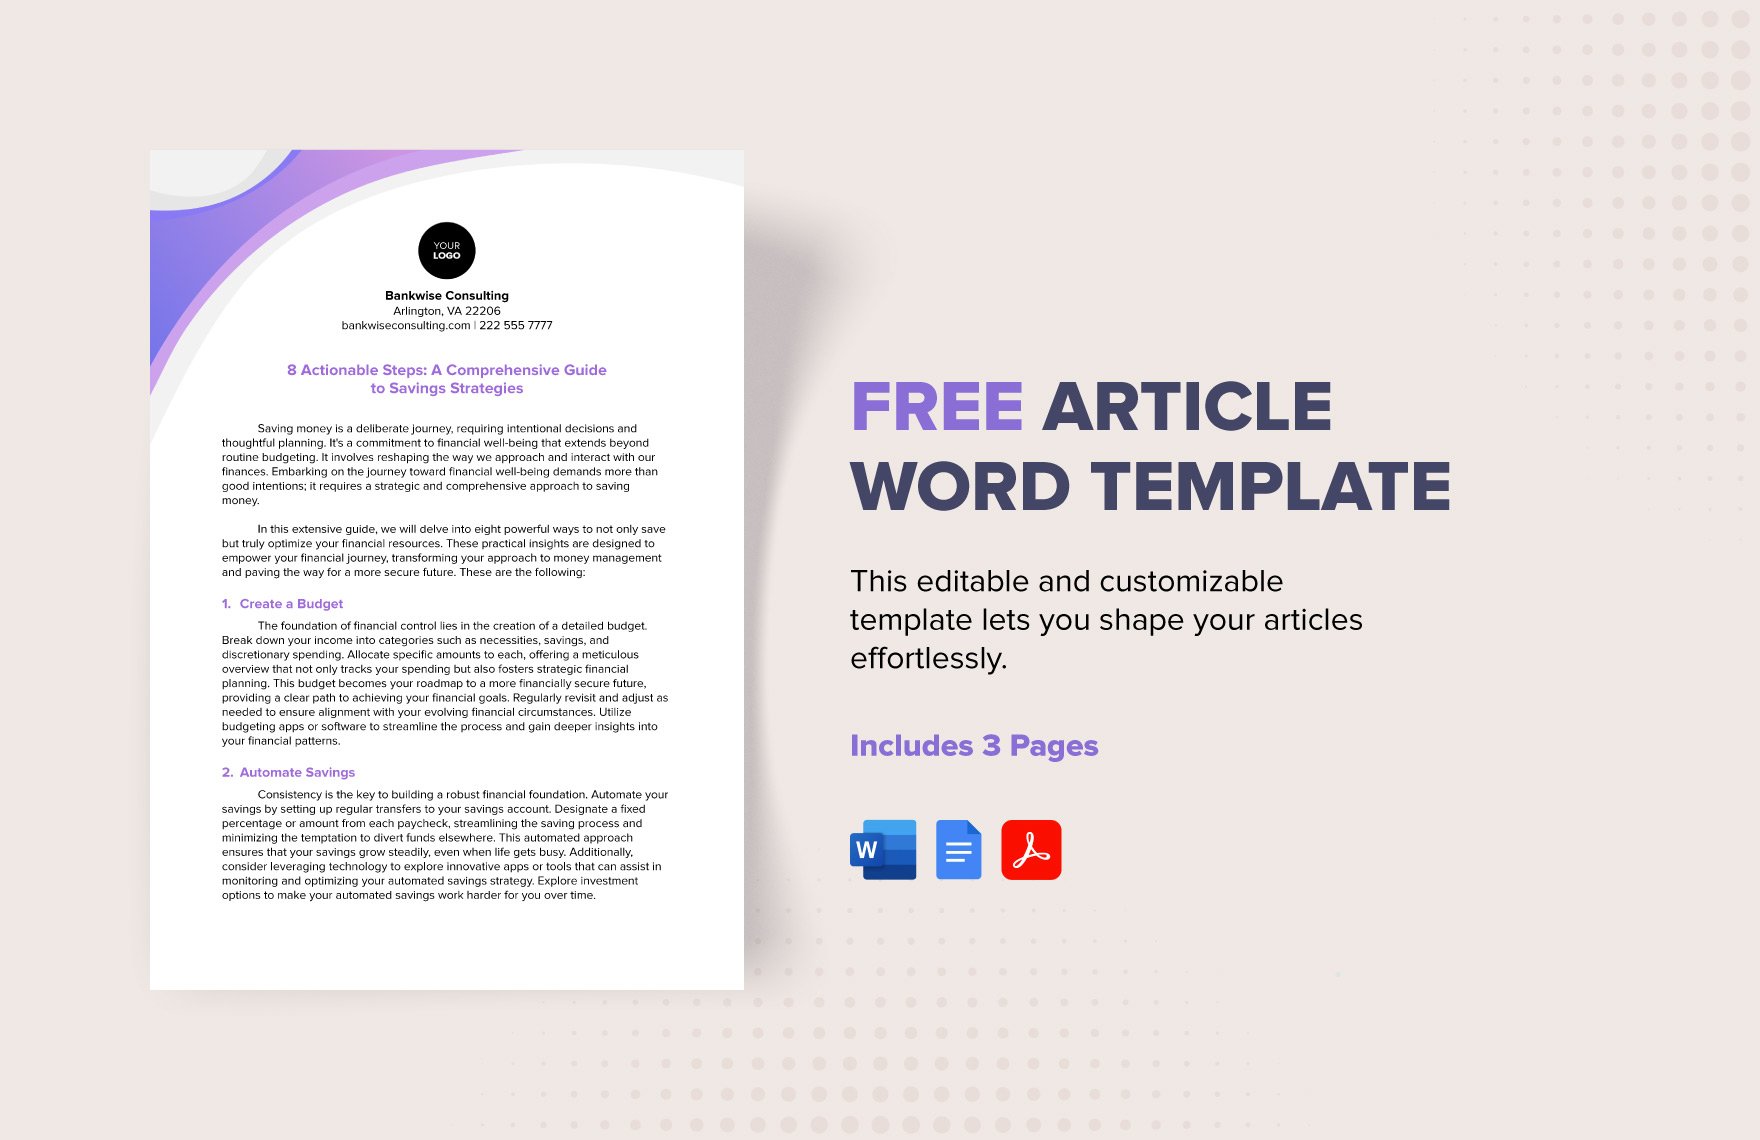 Article Word Template